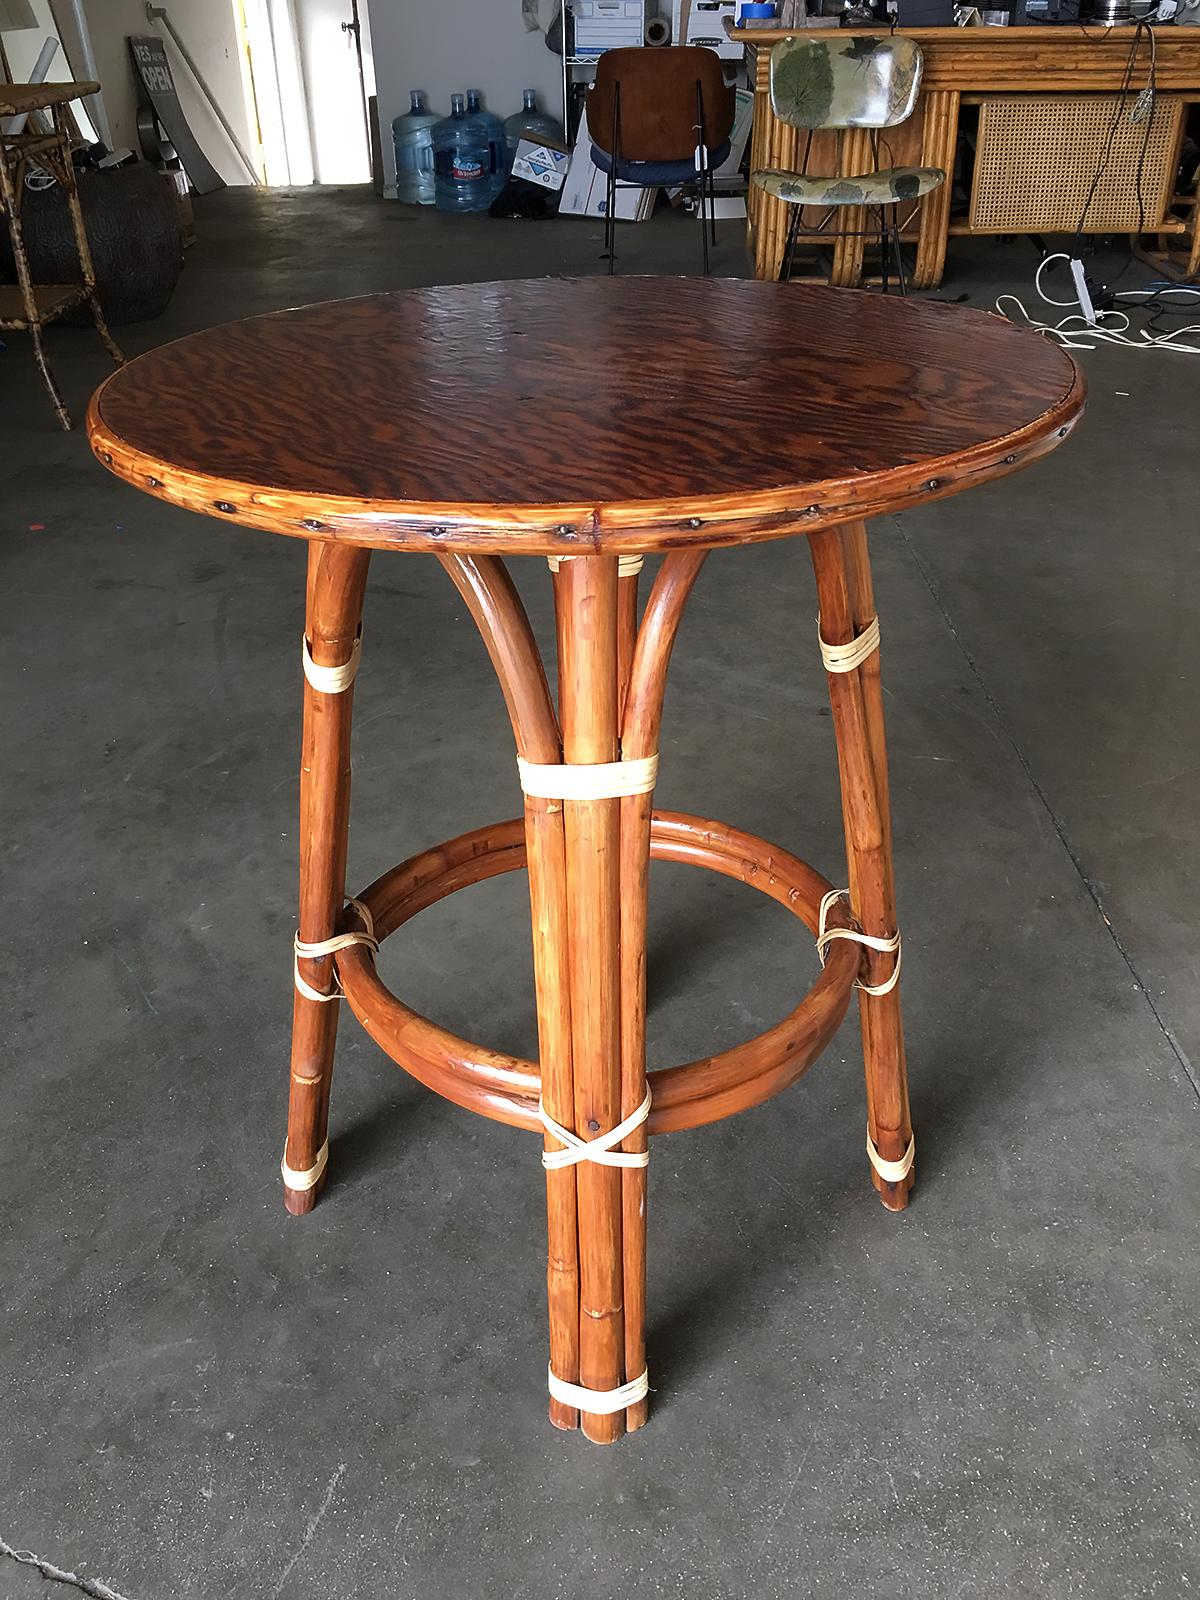 double circle table